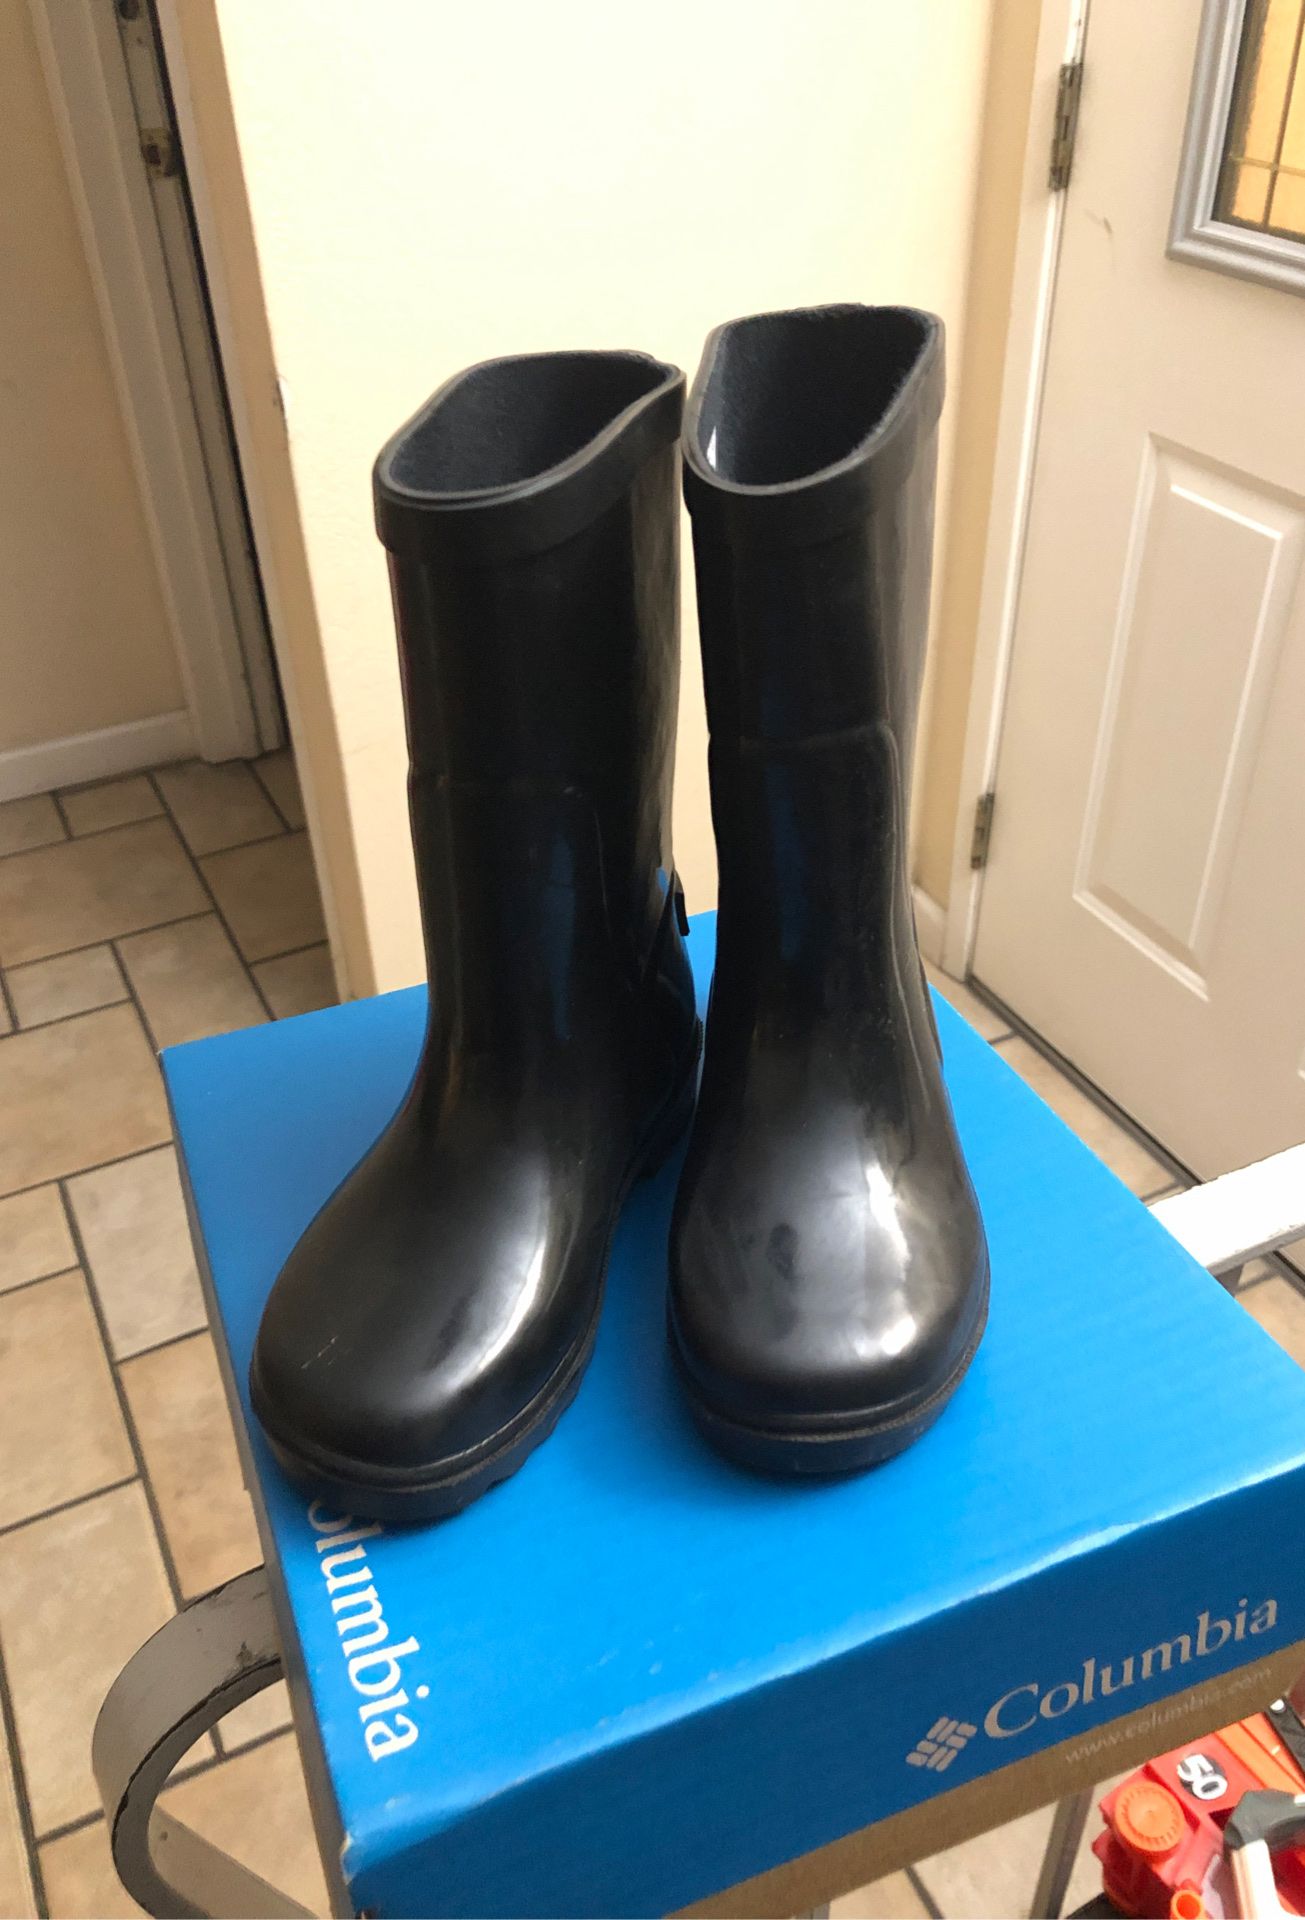 Colombia Toddler rain boots size 9